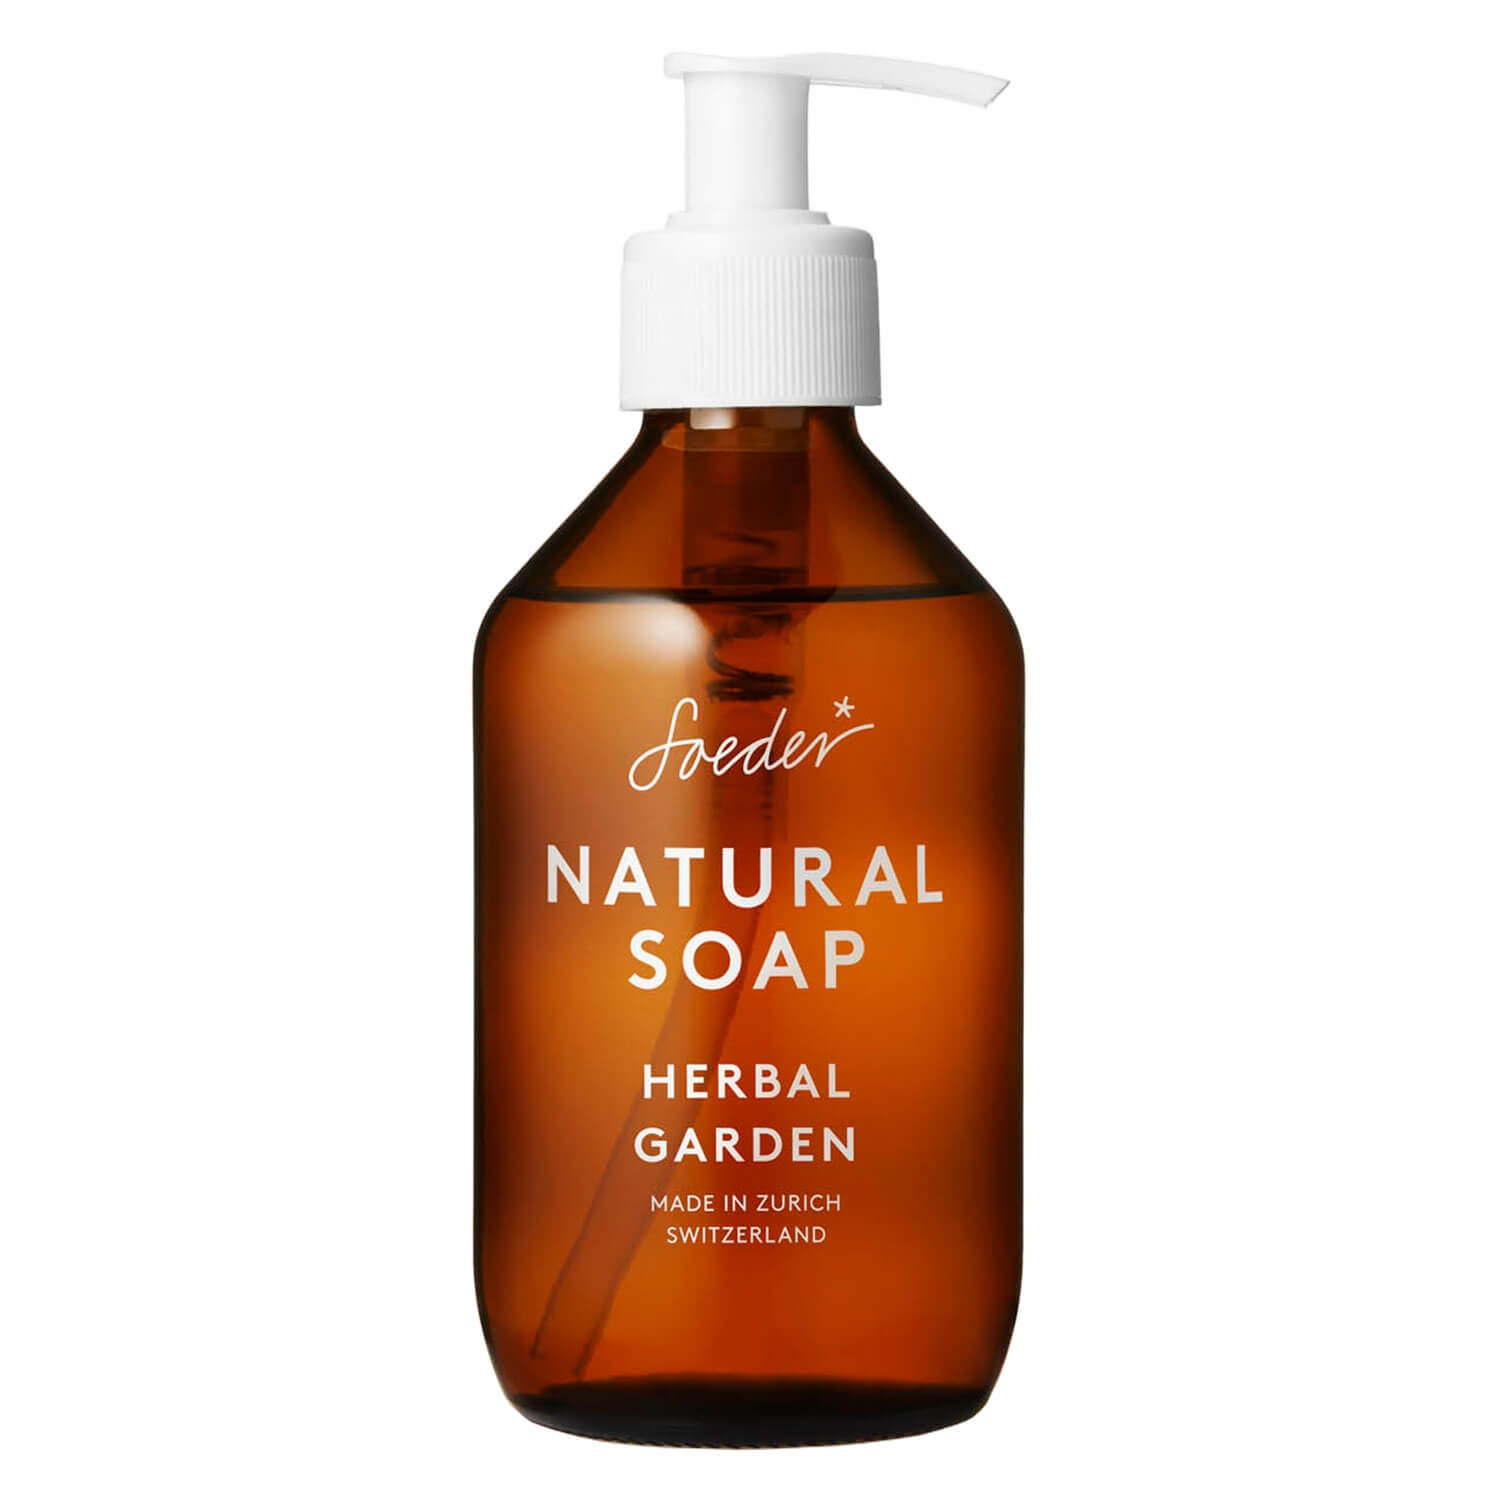 Product image from Soeder - Natural Soap Herbal Garden